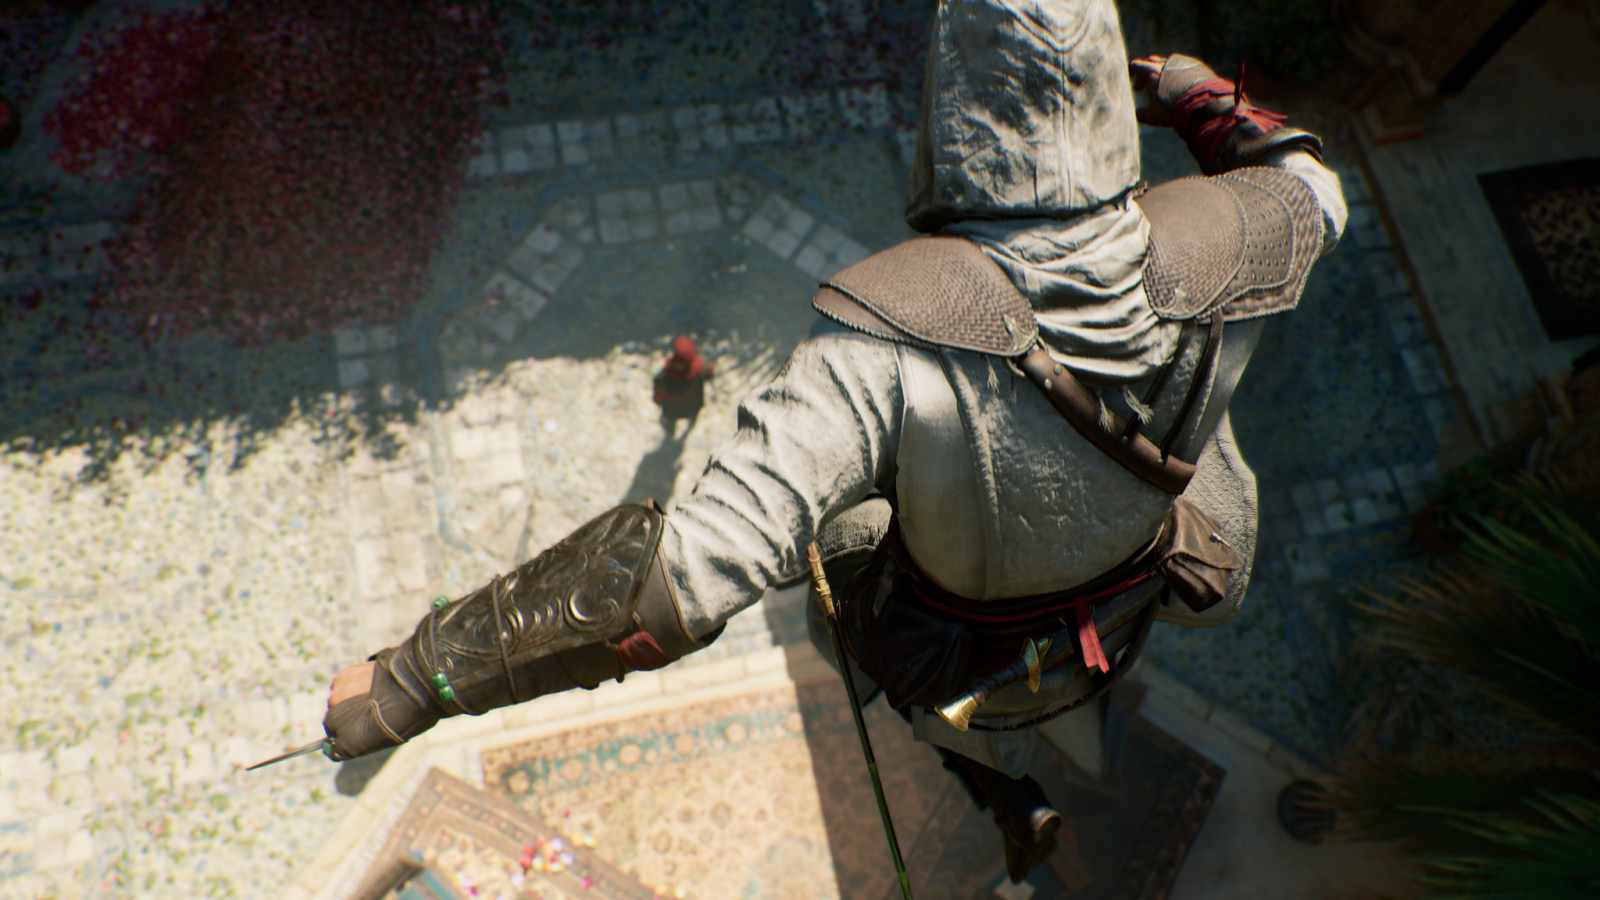 What your PC needs to have to run Assassin's Creed: Valhalla